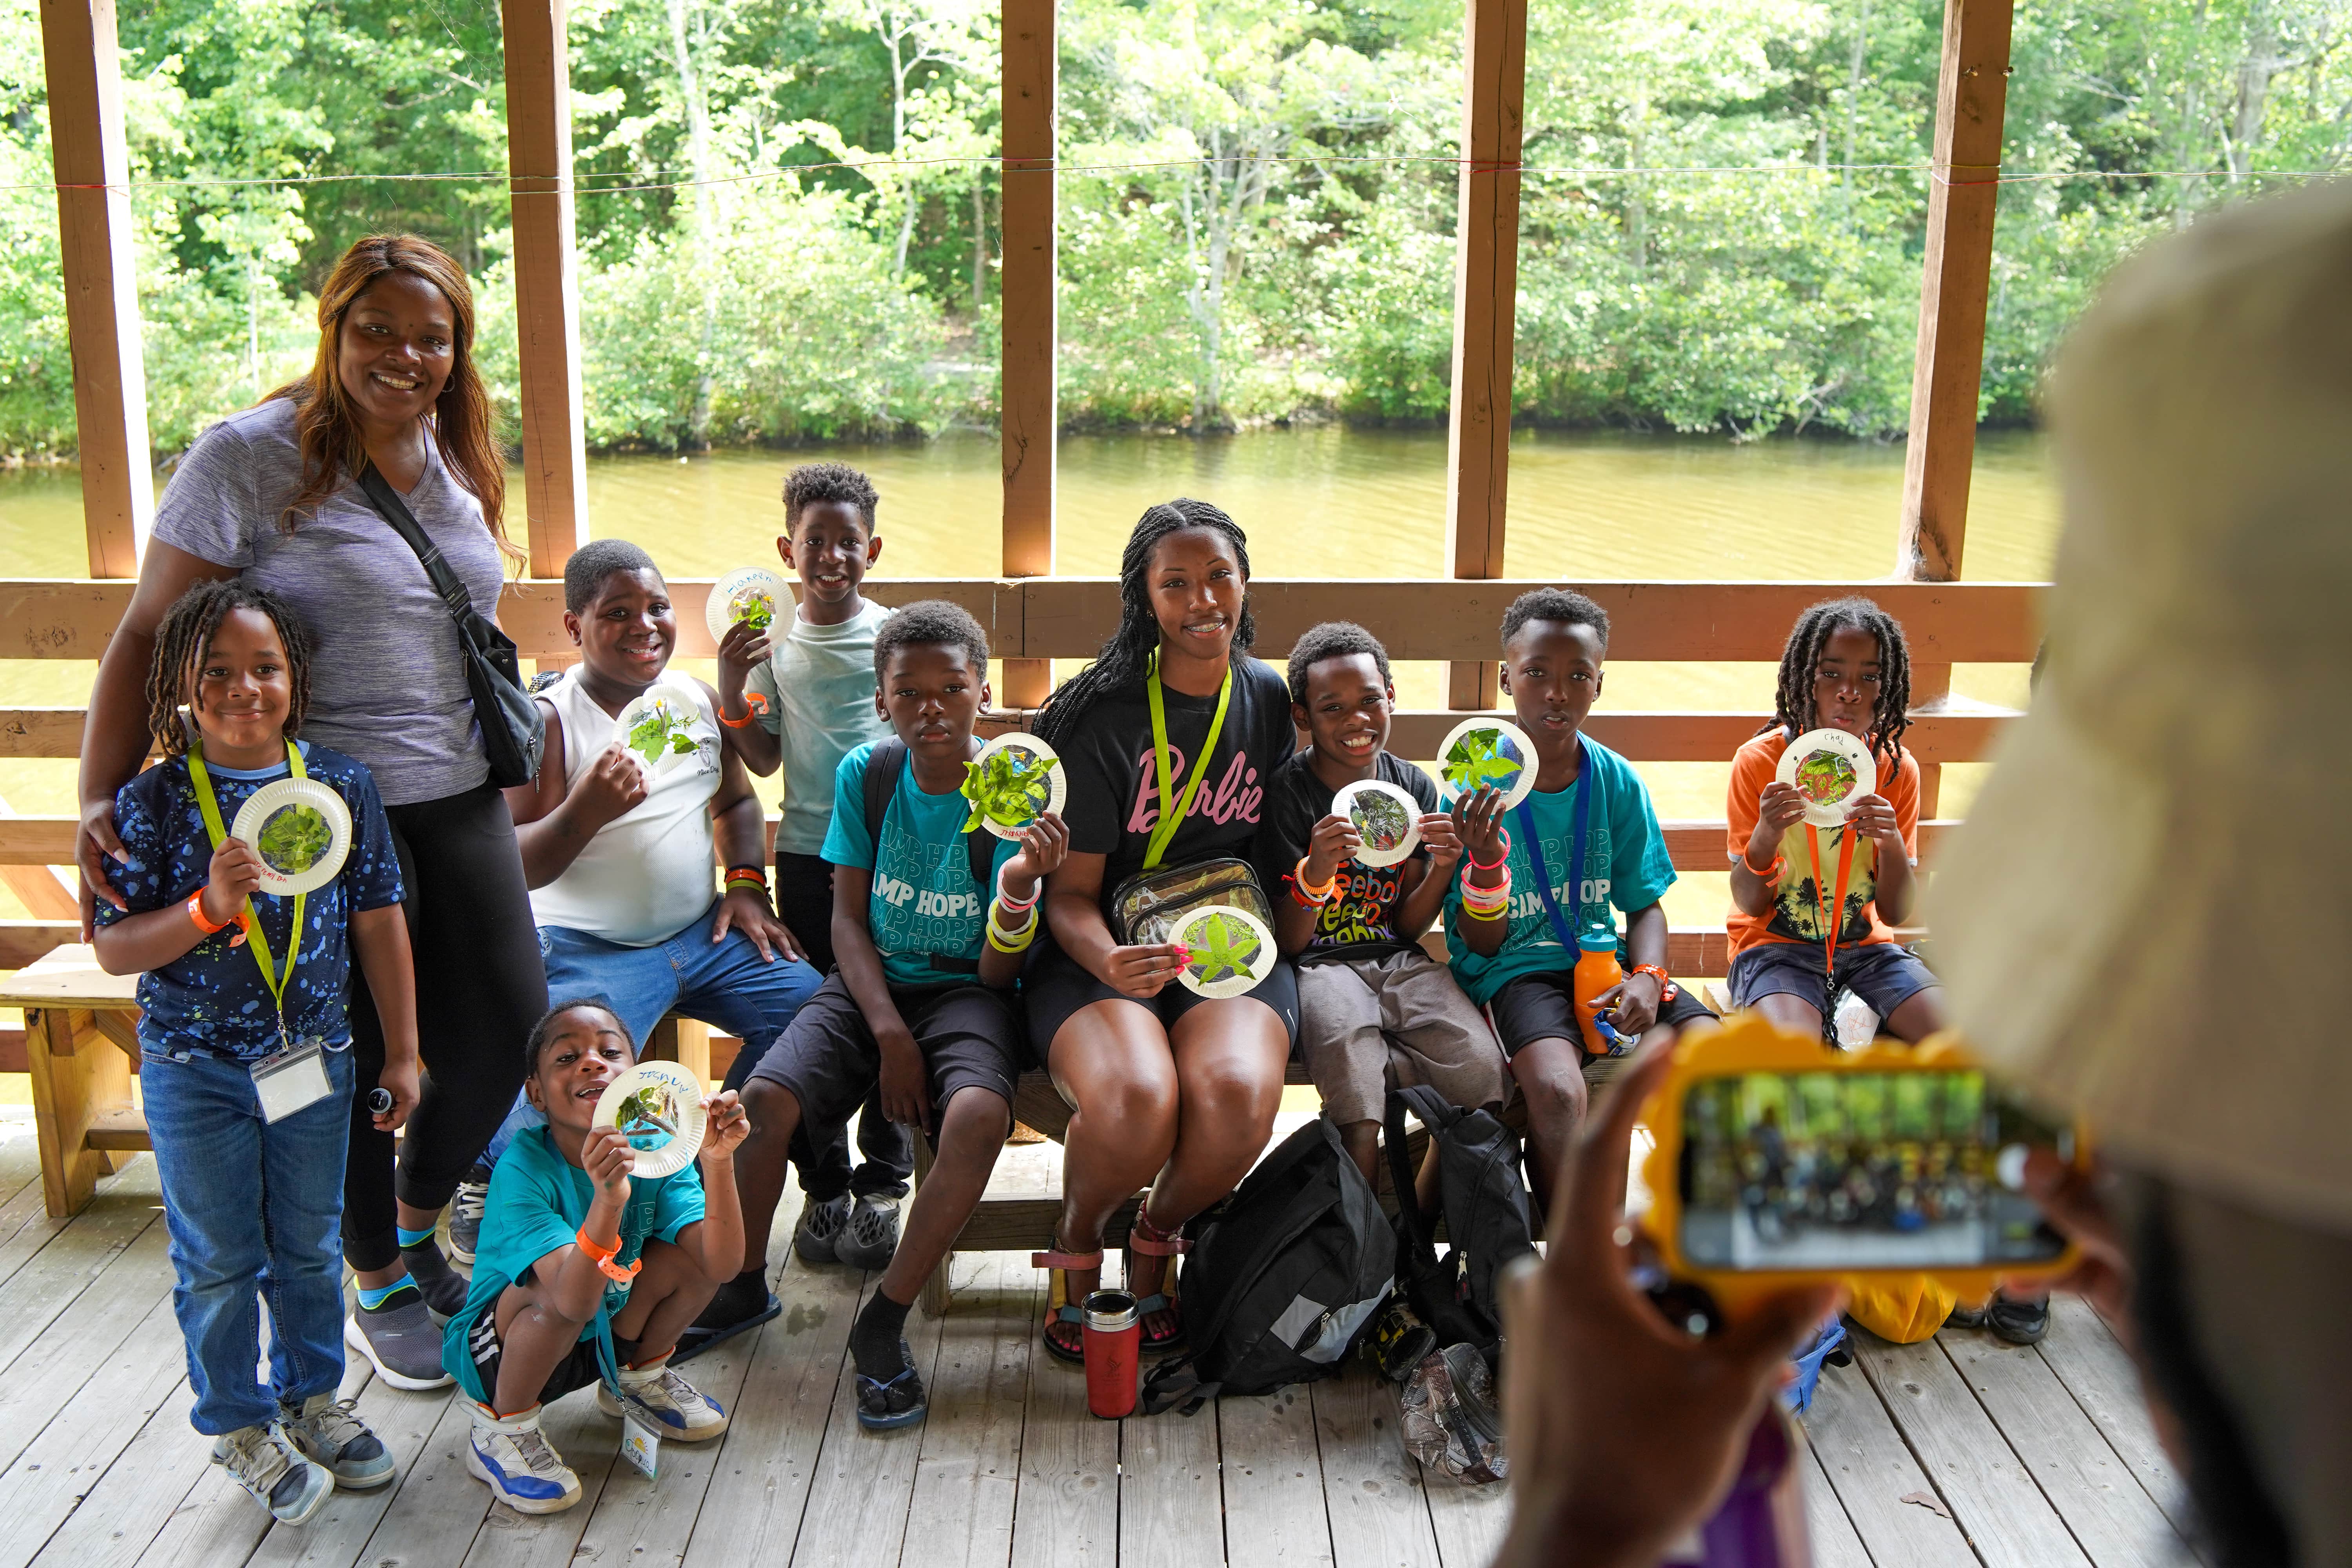 DA Howard with students and nature art at Camp Hope of Central Georgia